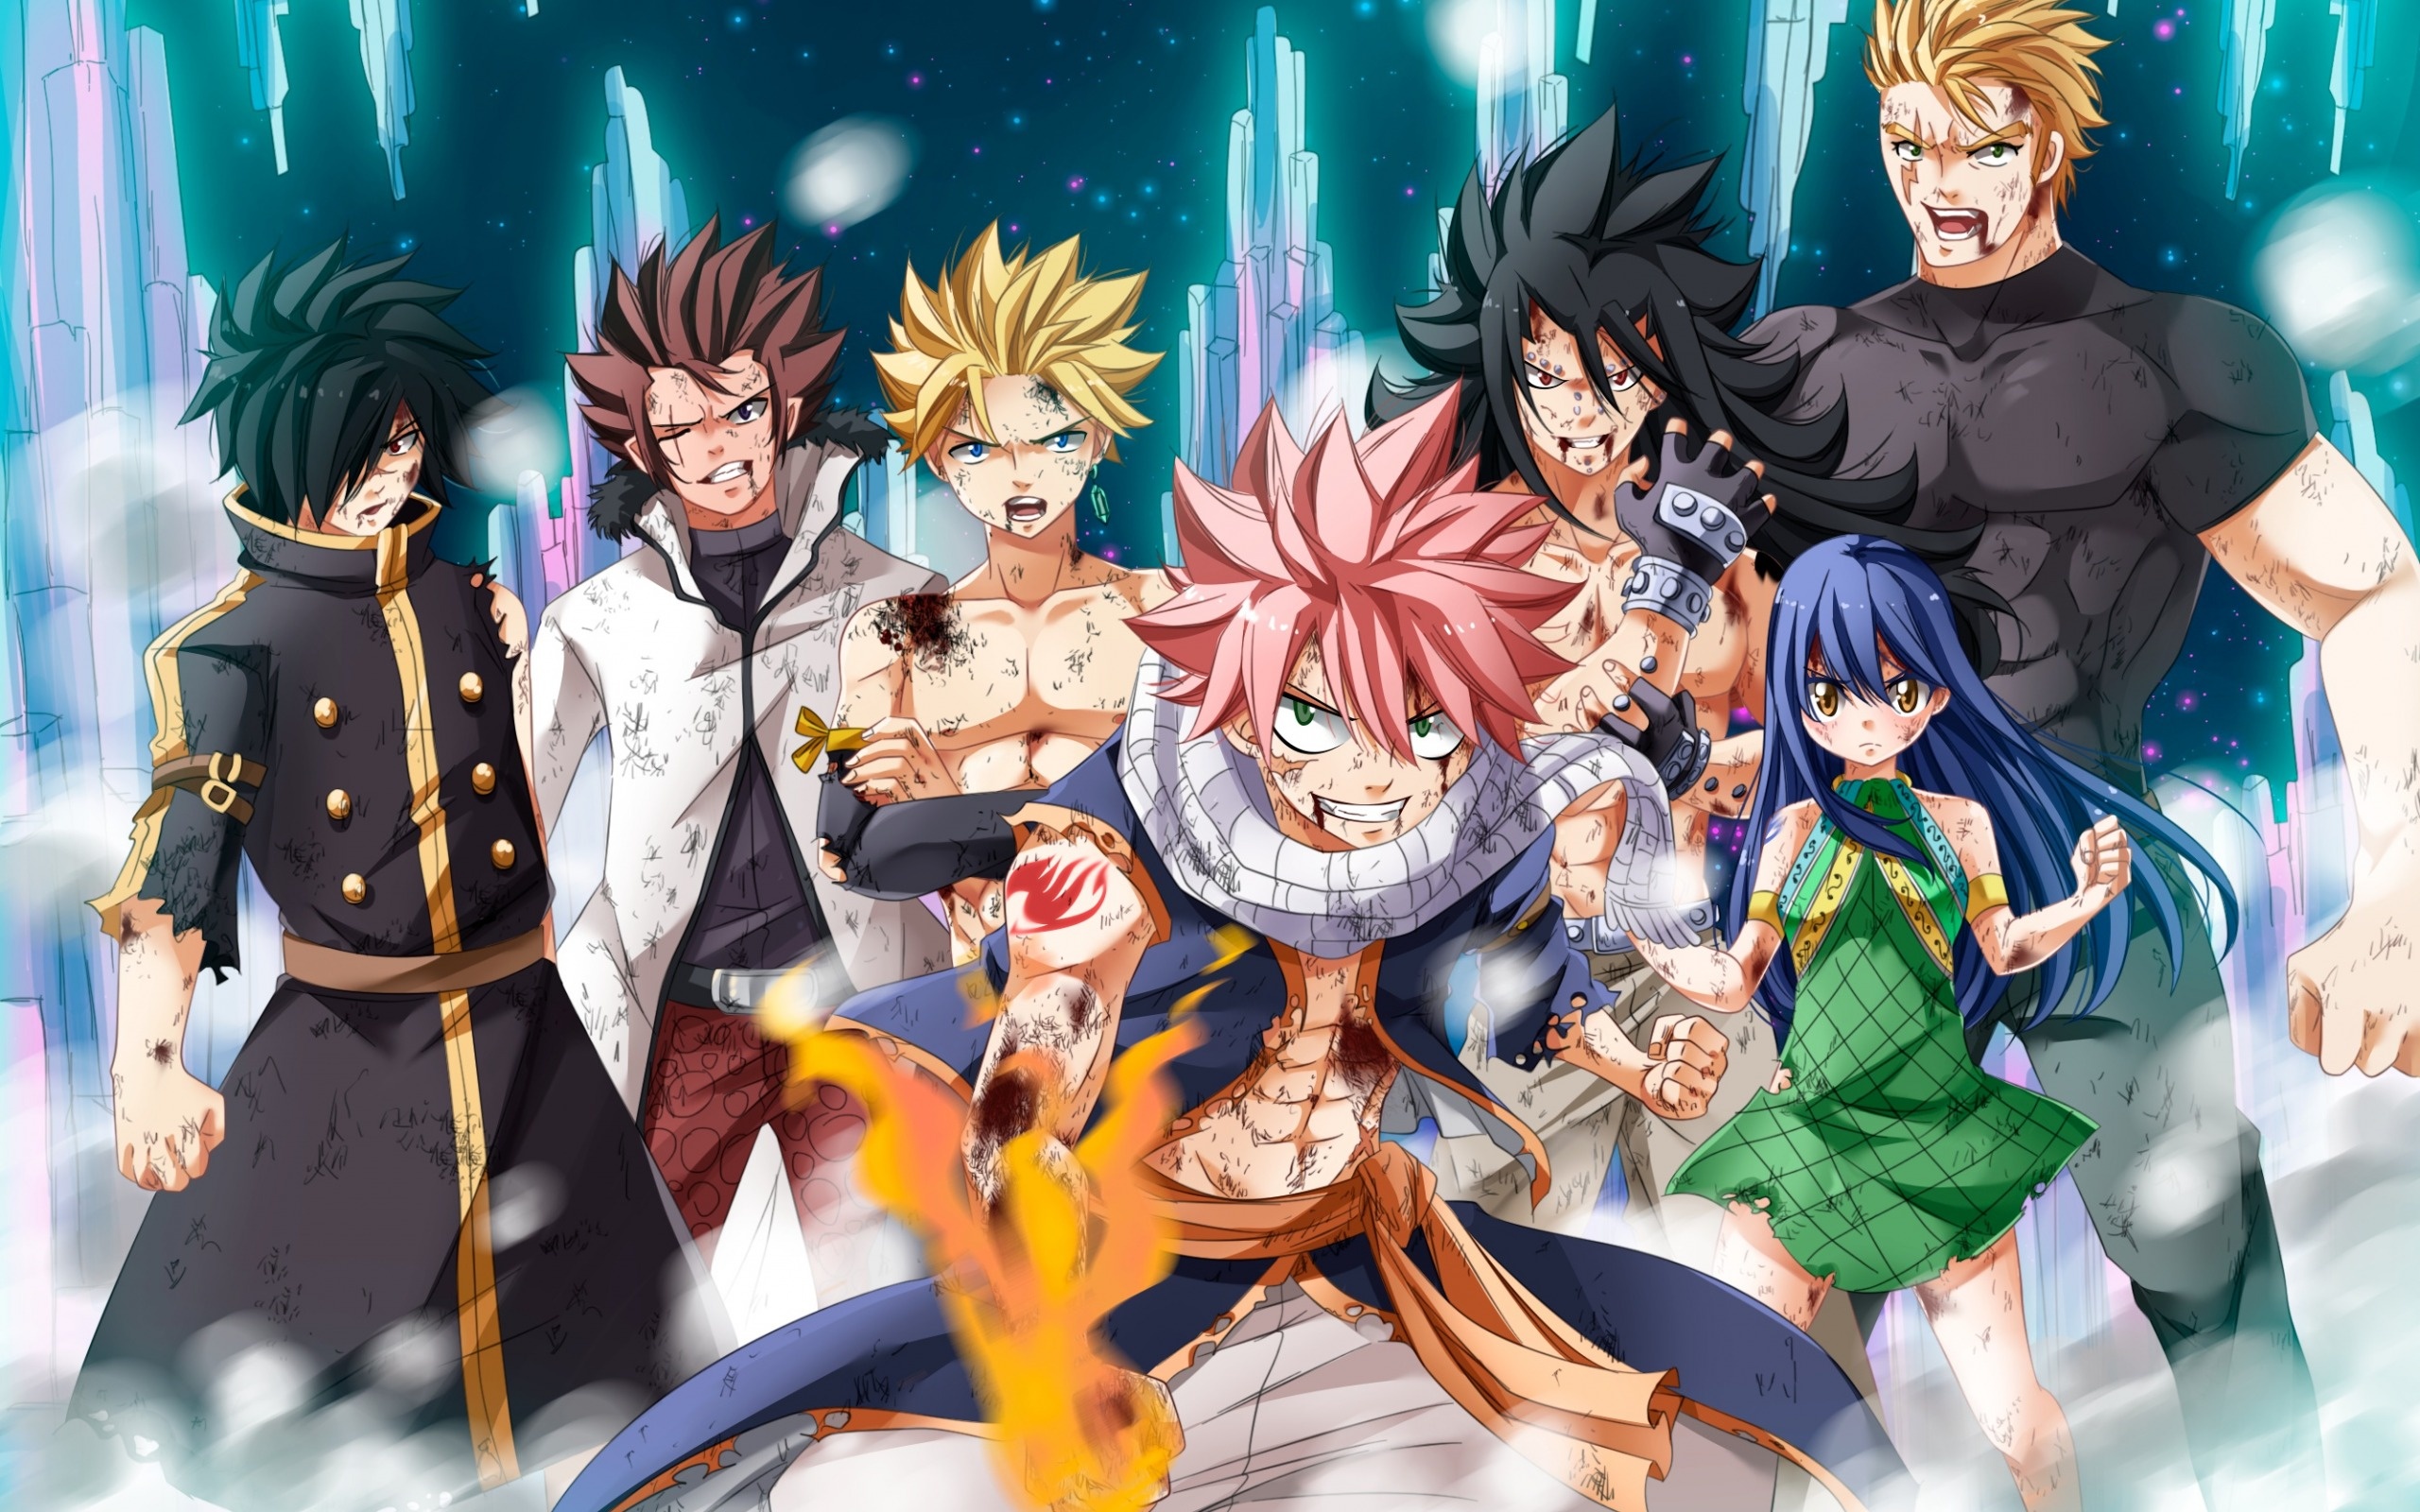 Gray Fullbuster: Fairy Tail, Japanese manga, Anime characters, Wendy Marvell, Natsu Dragneel, Erza Scarlet. 2560x1600 HD Background.